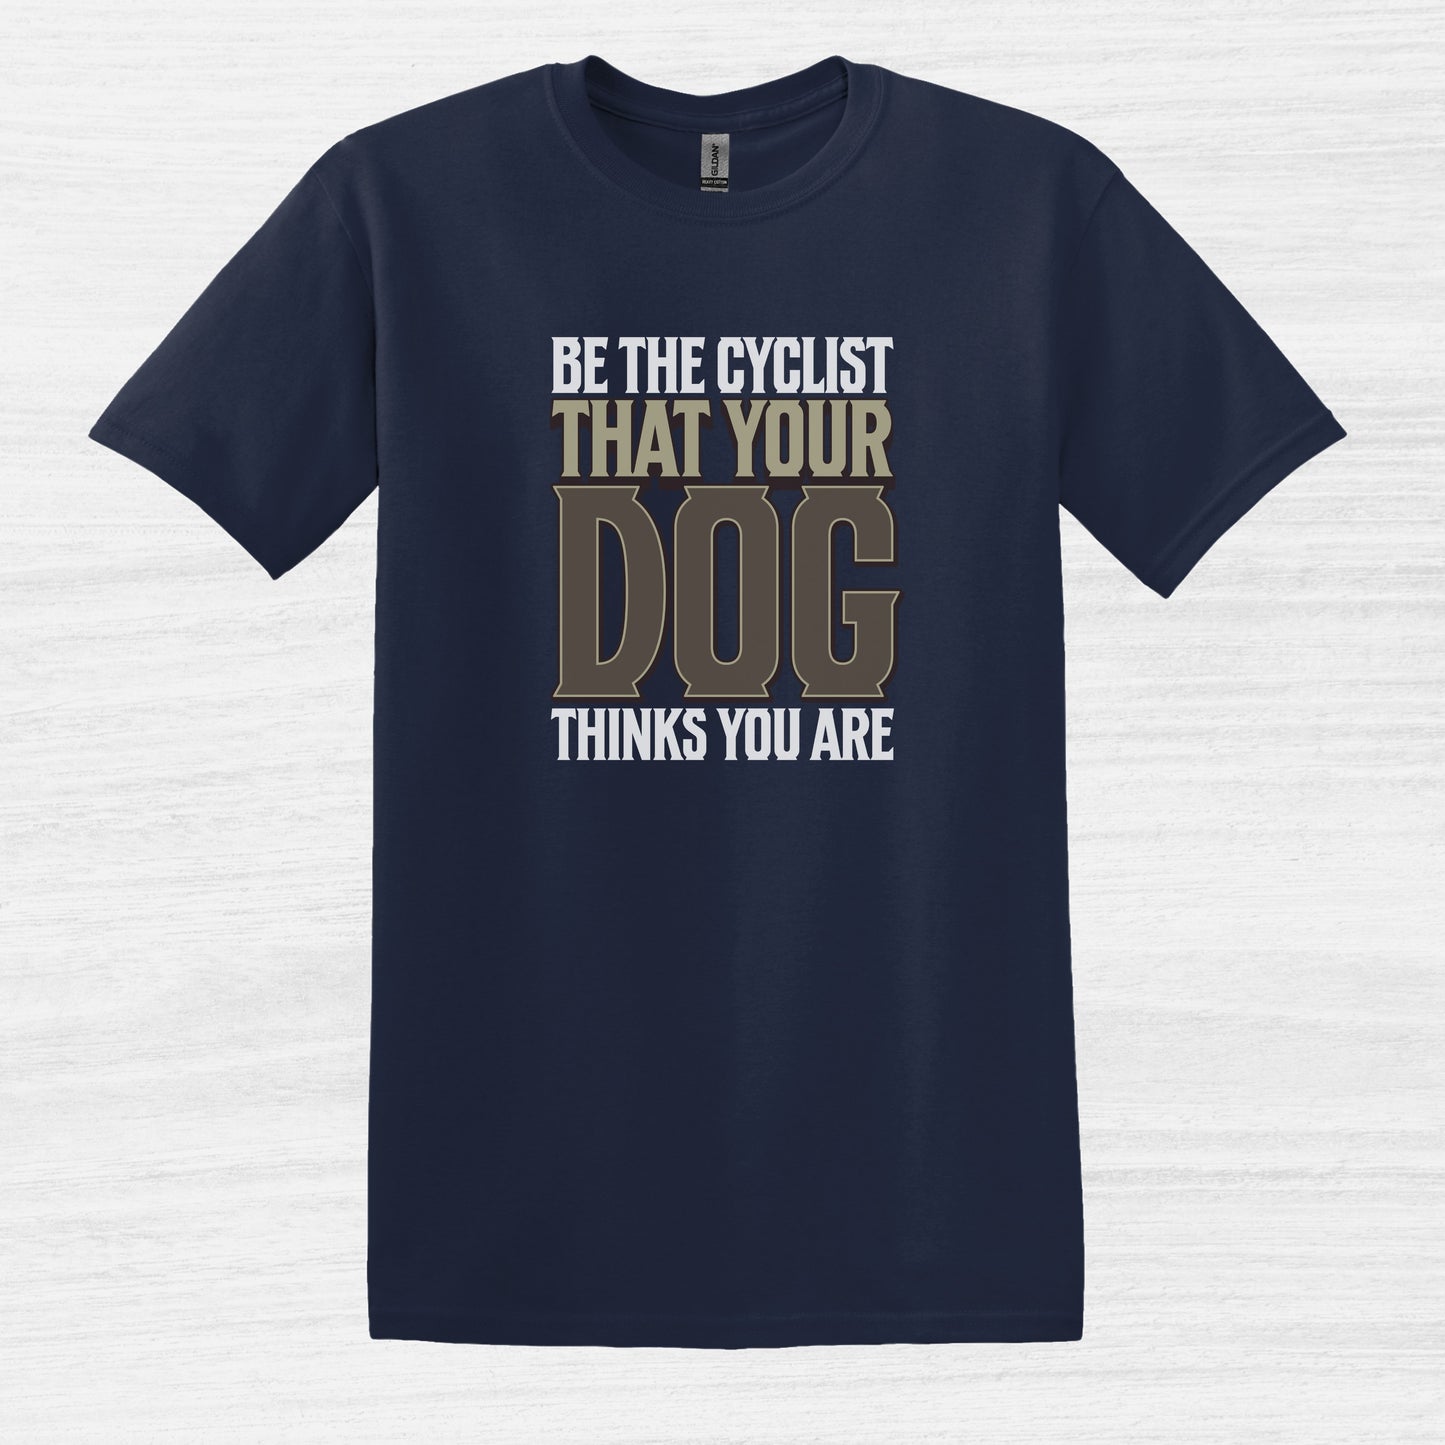 Bike Bliss Be the cyclist that your dog thinks you are T-Shirt for Men Size Navy 2